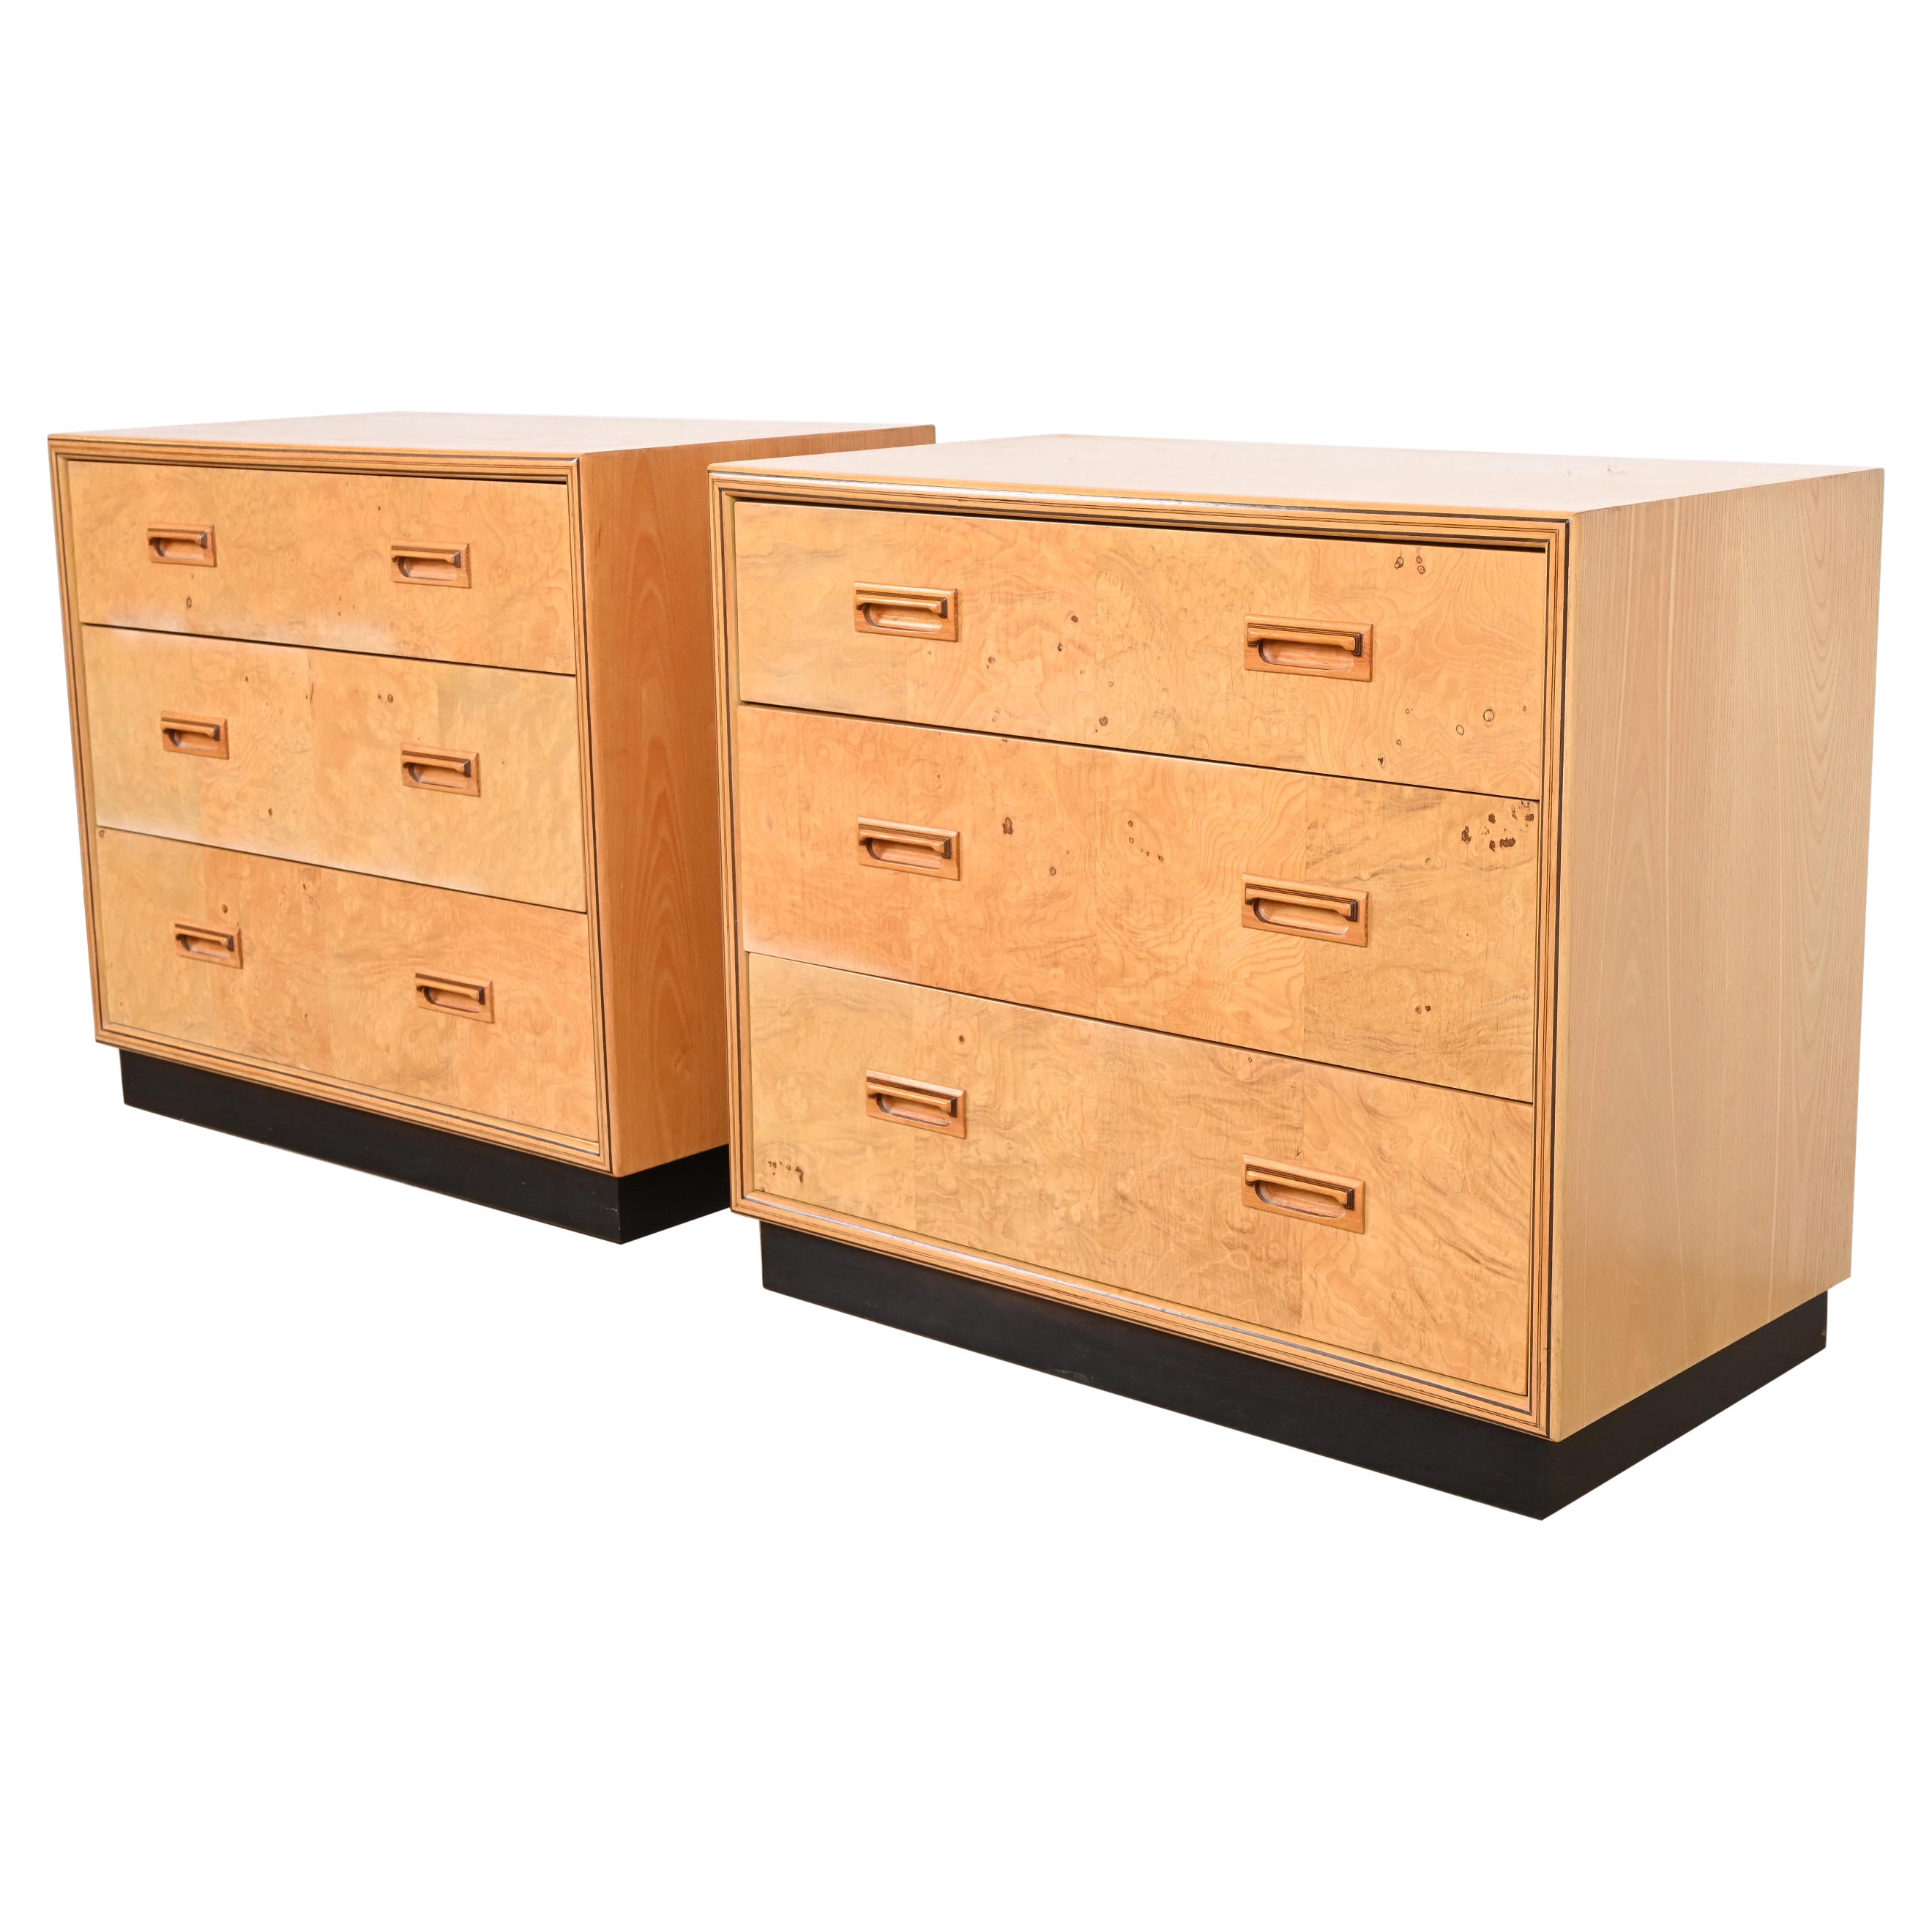 Milo Baughman Style Burl Wood Bedside Chests by Henredon, Pair For Sale